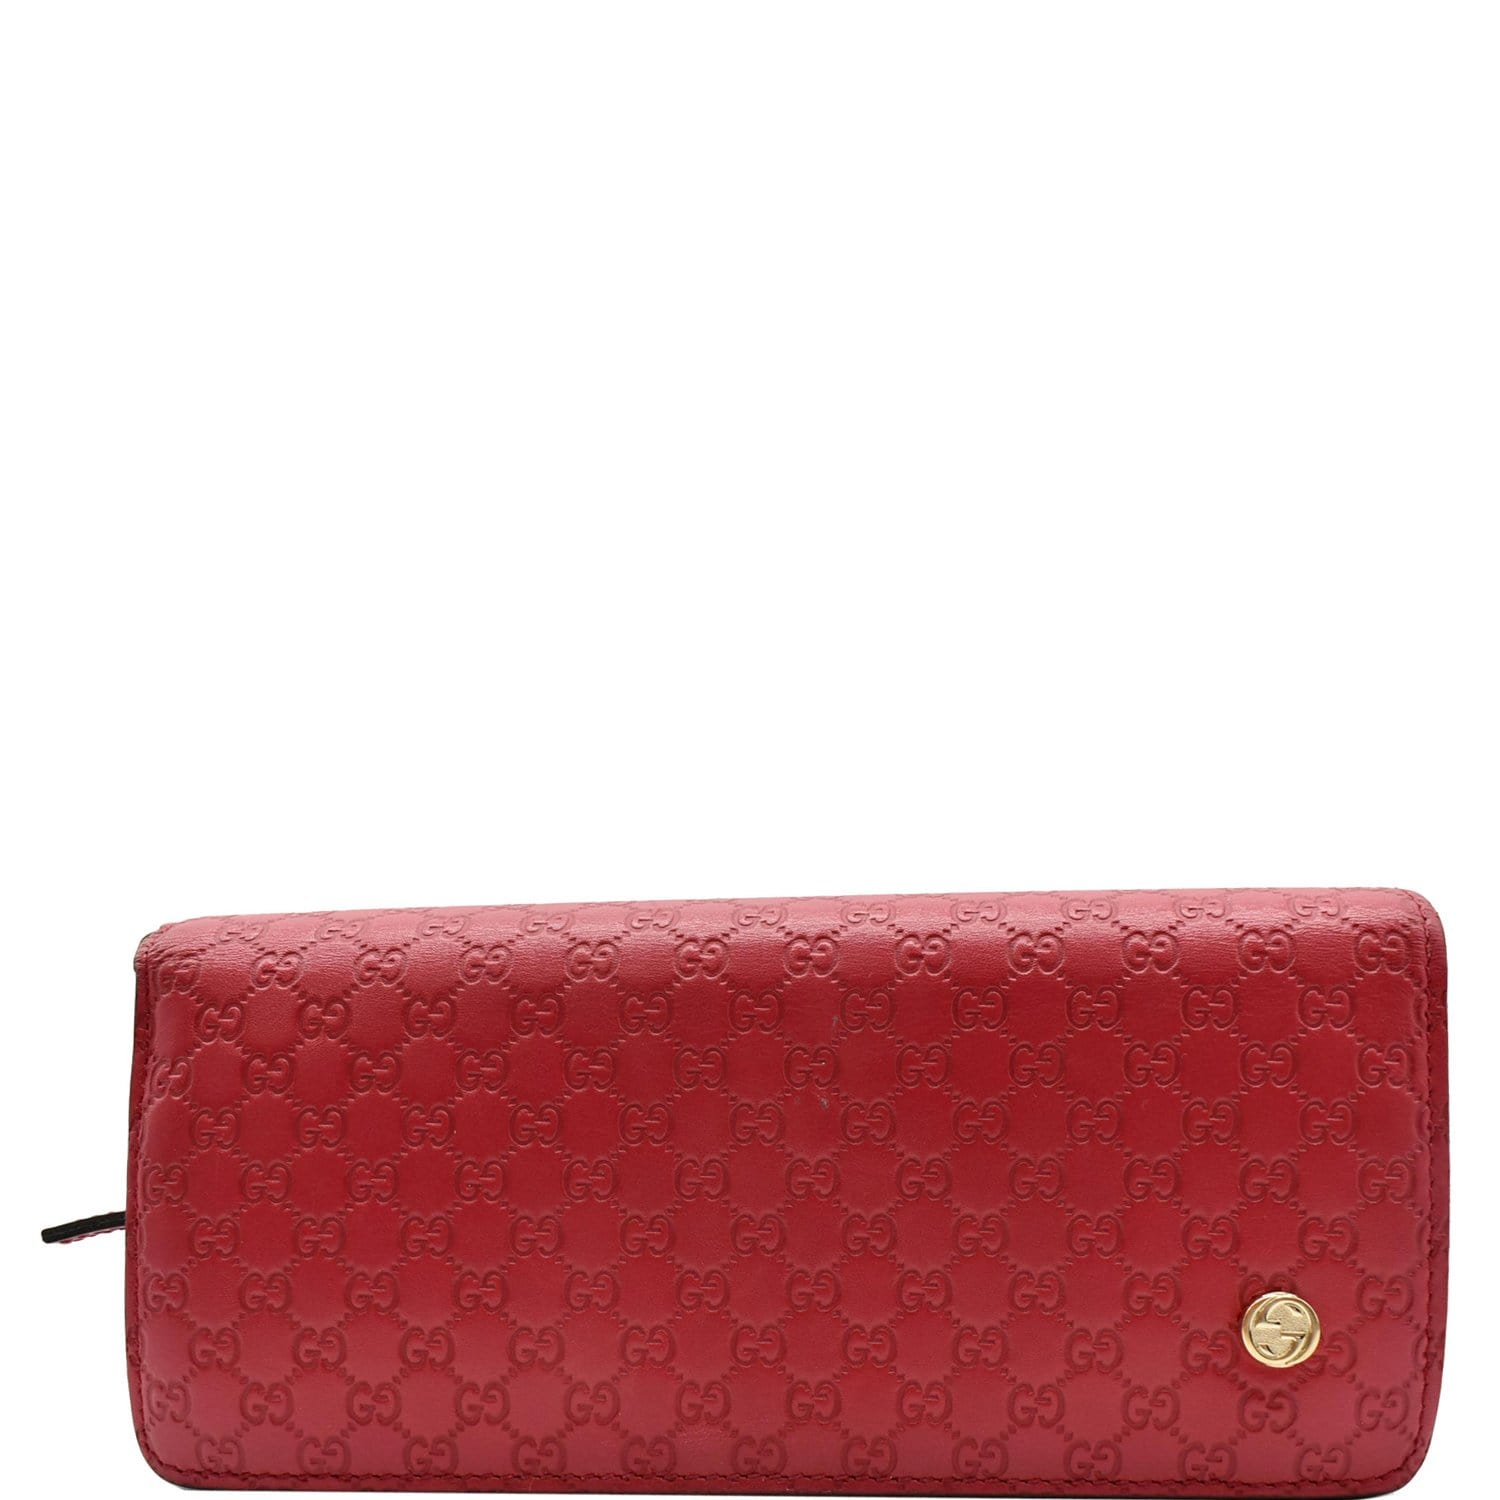 Gucci Signature GG Monogram Leather Wallet